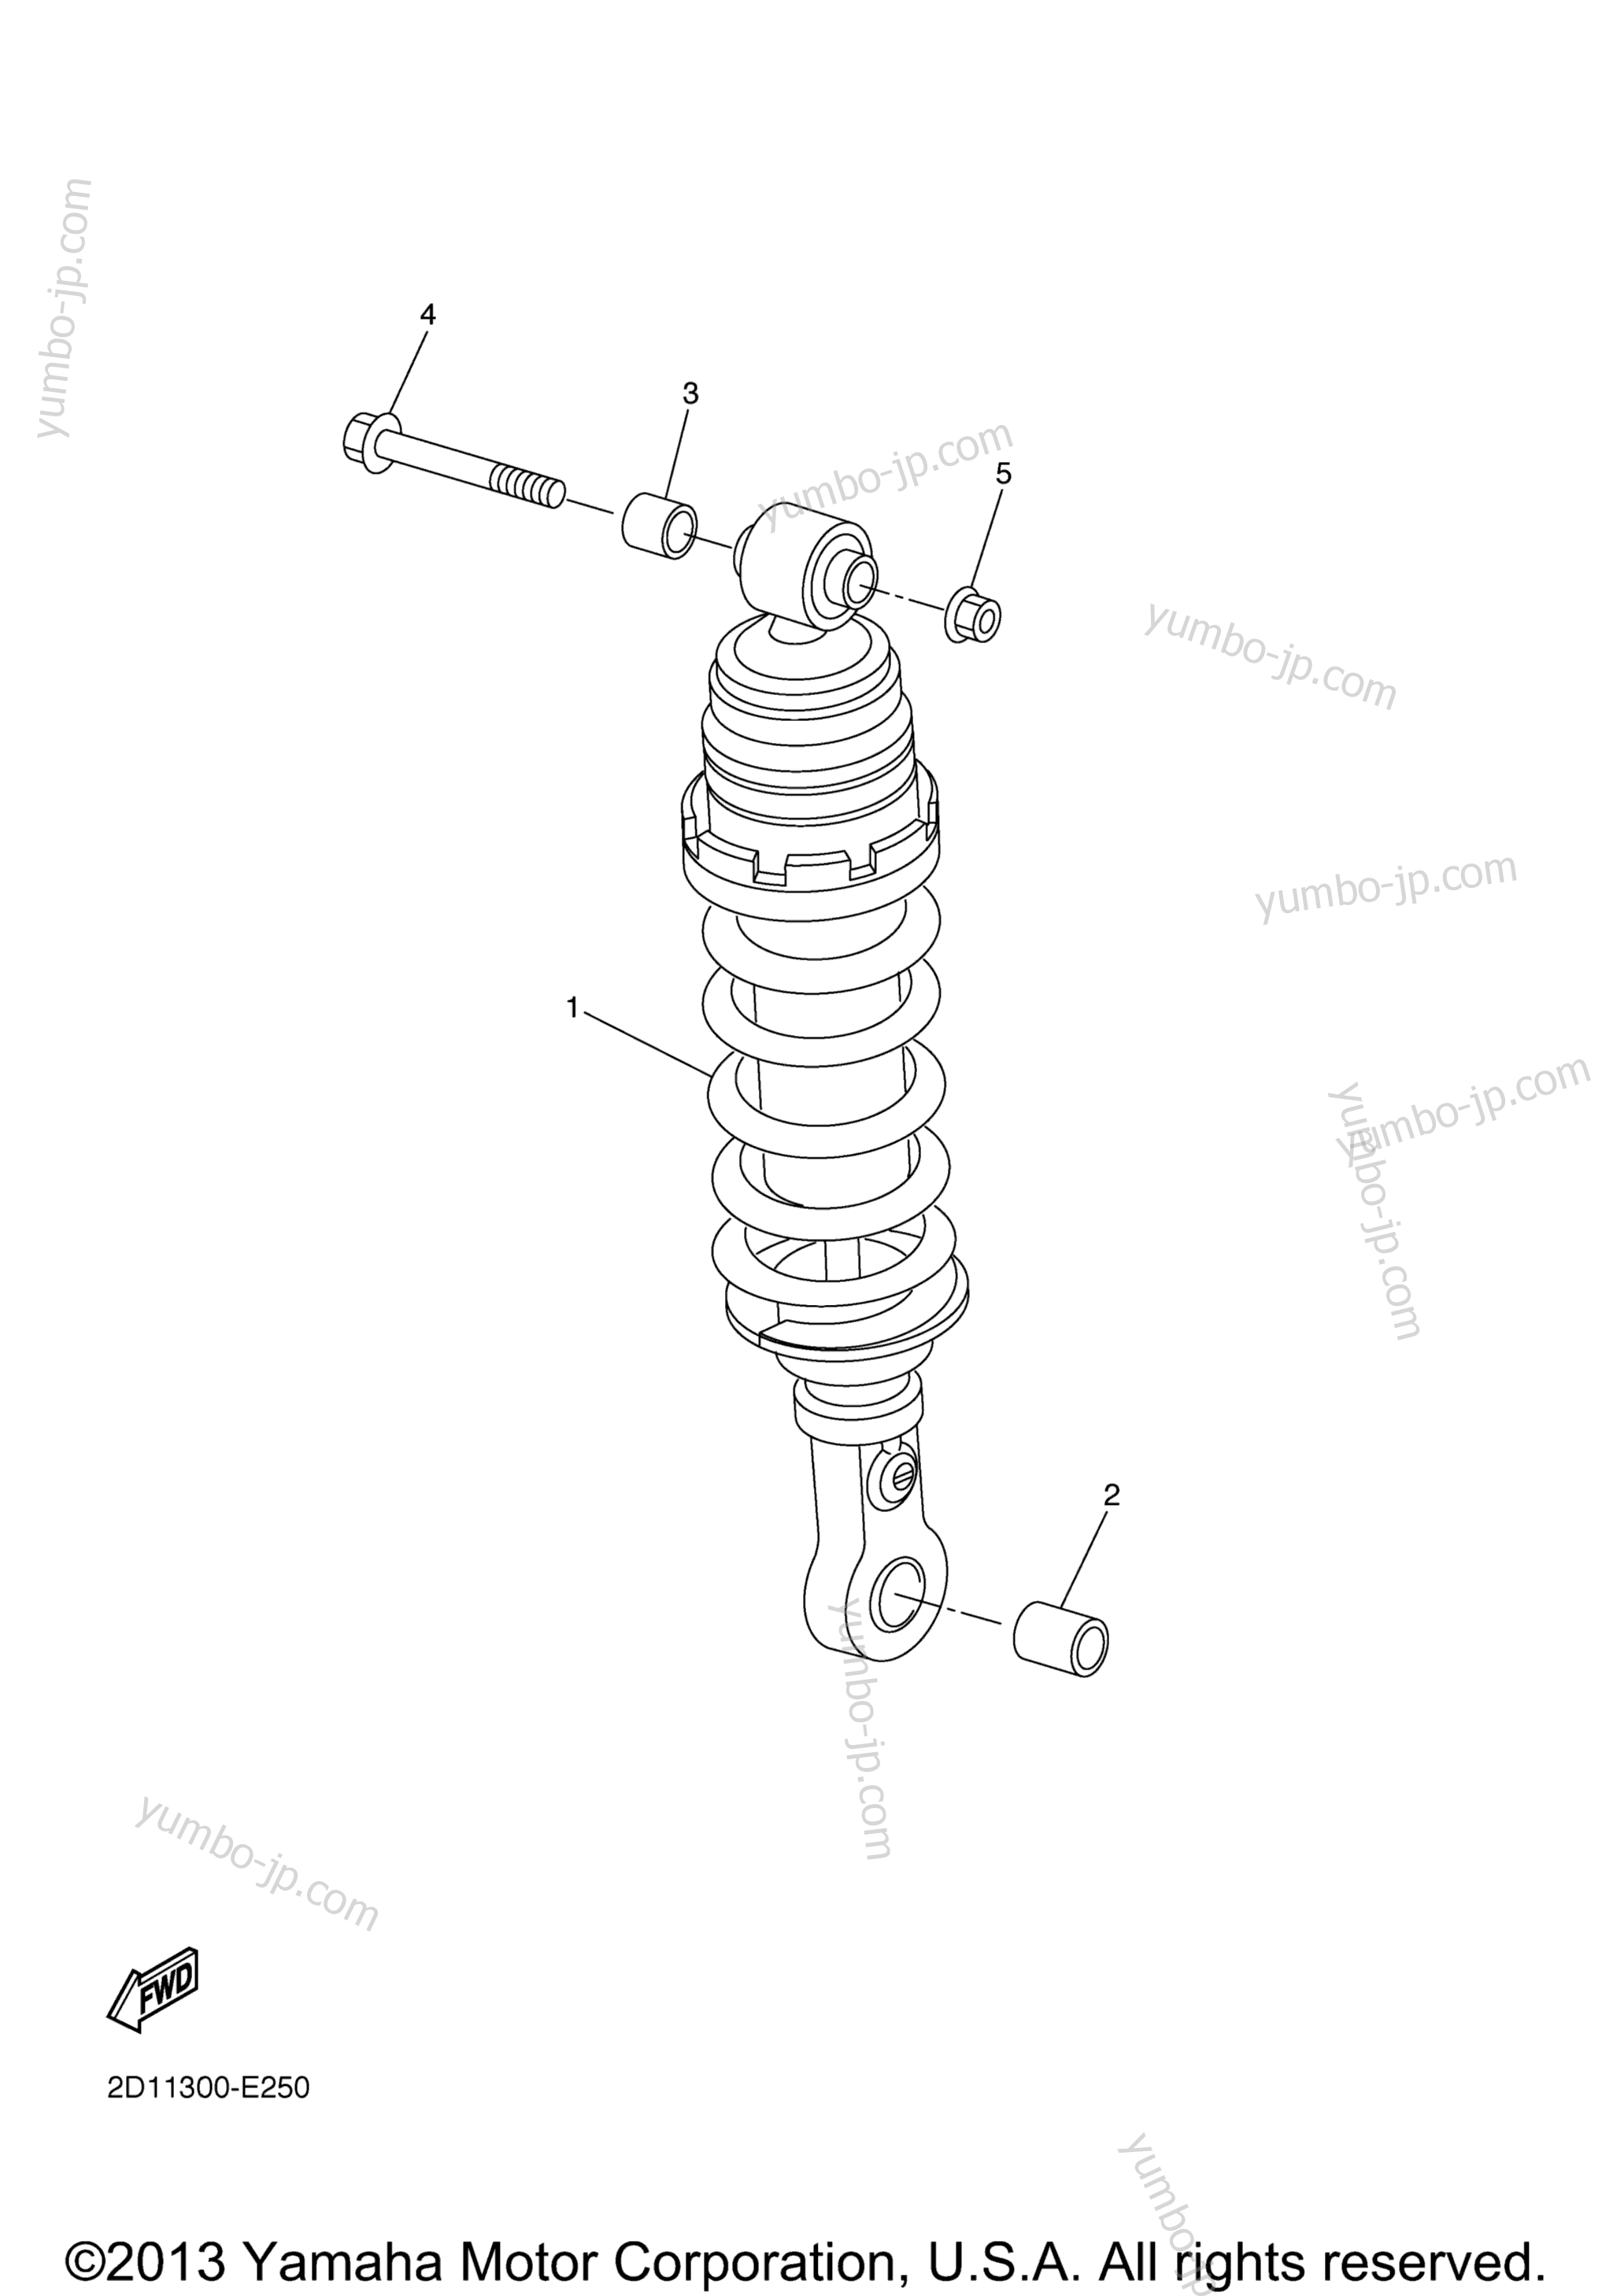 Rear Suspension for motorcycles YAMAHA FZ1 (FZS10ZR) 2010 year